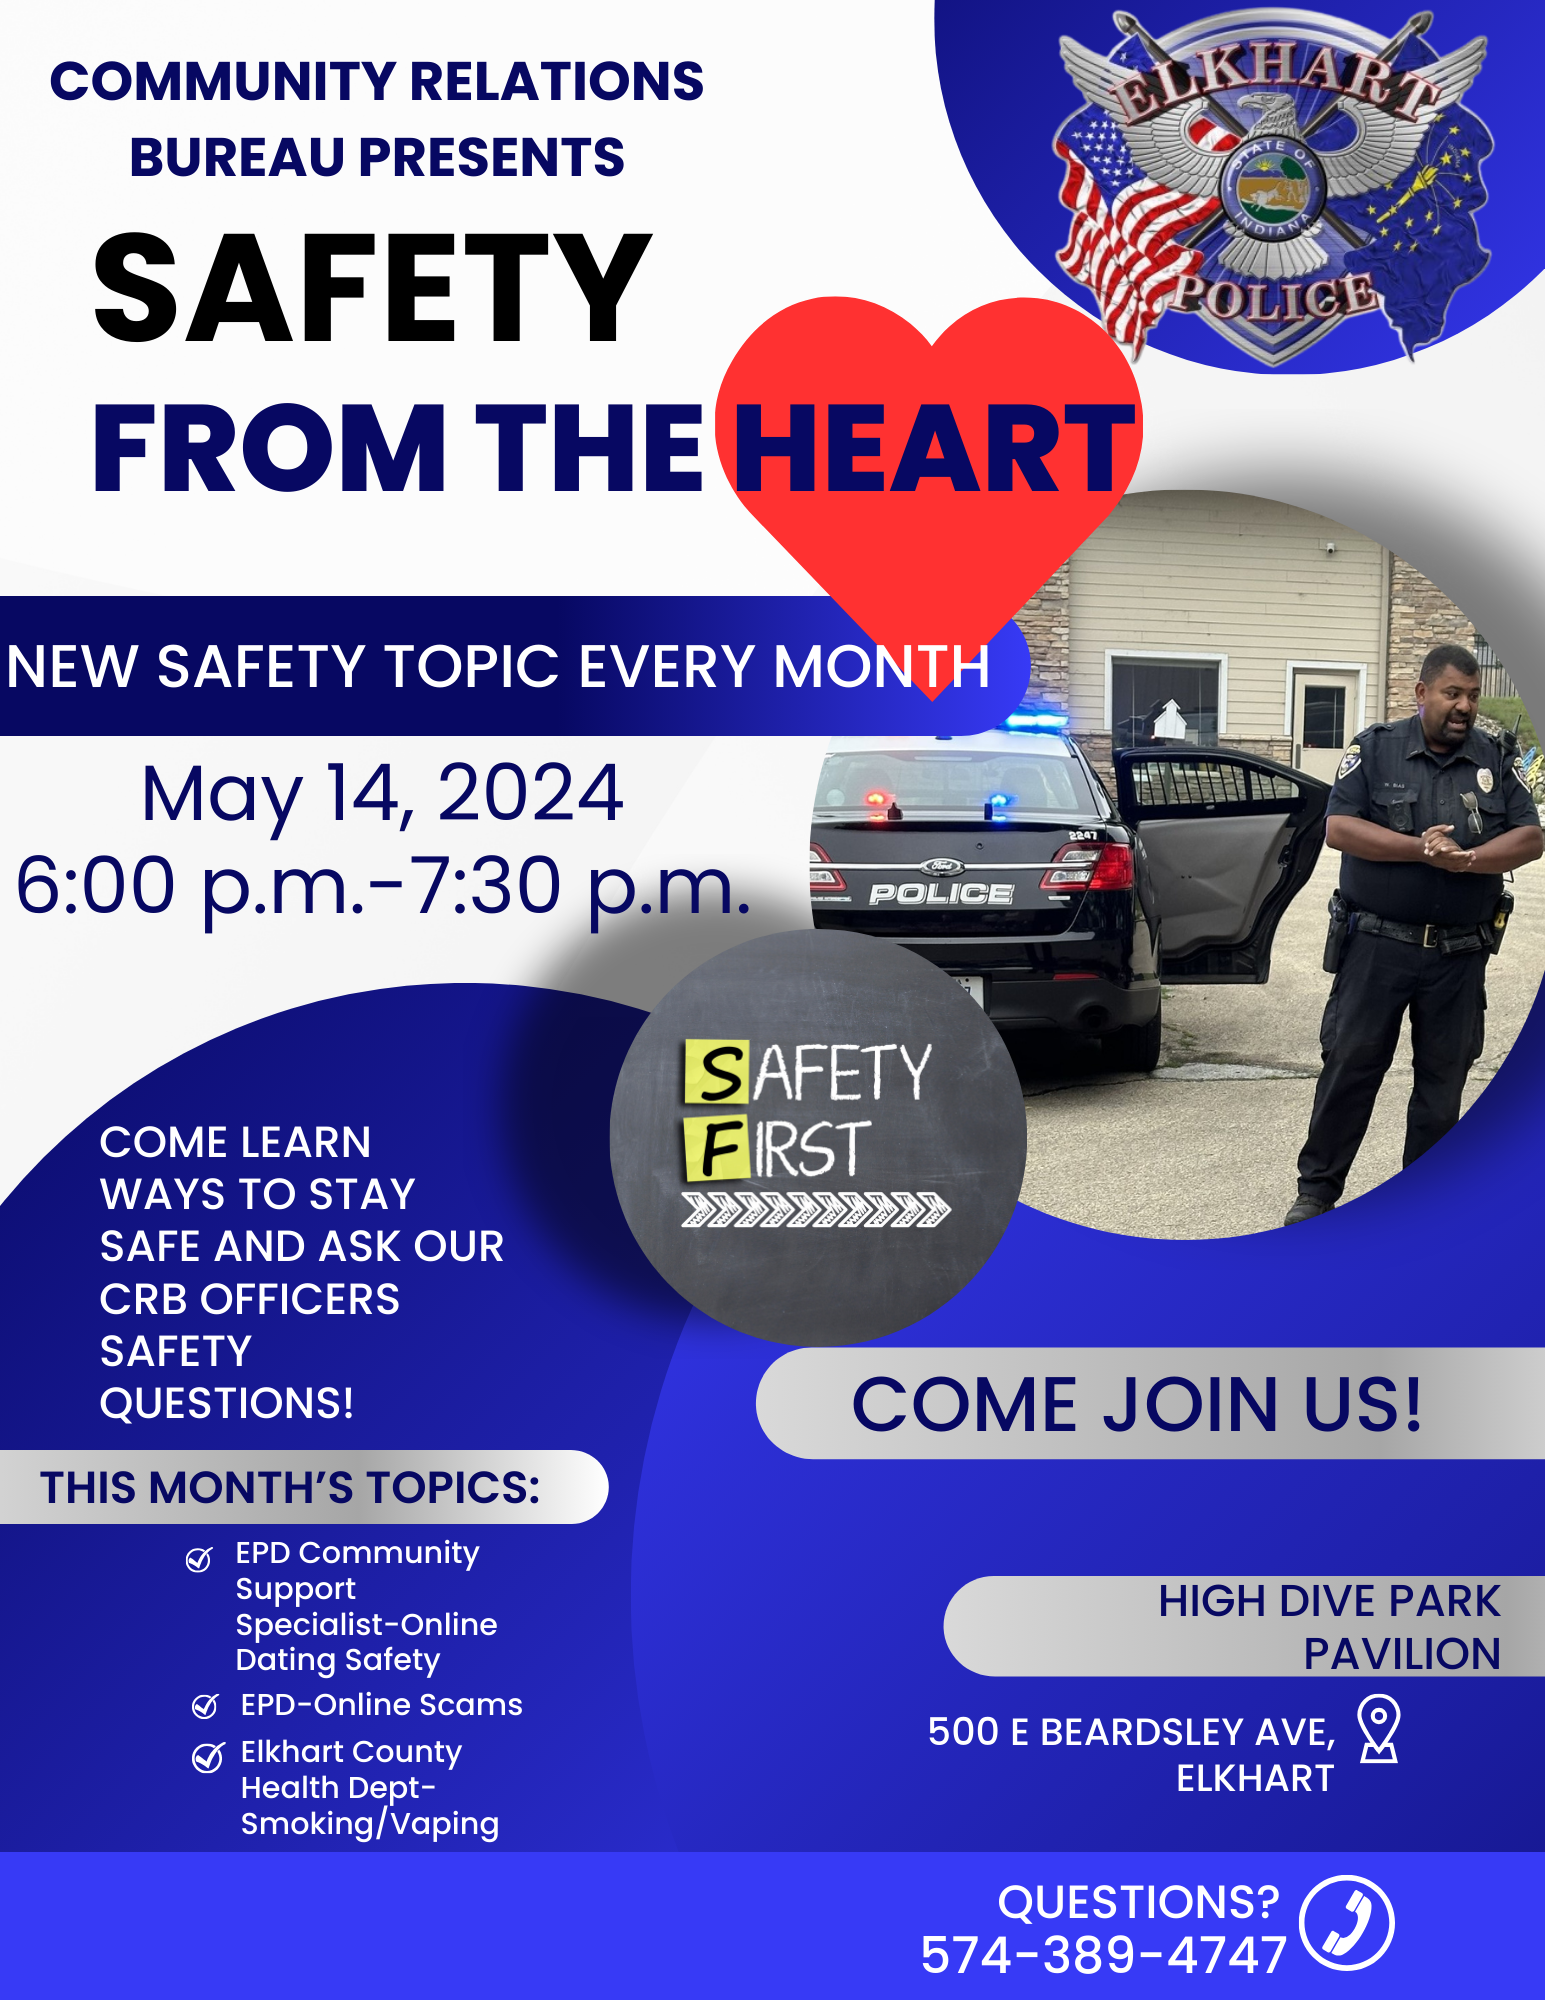 Safety from the Heart May 14, 2024 Presentation at High Dive Park Pavilion